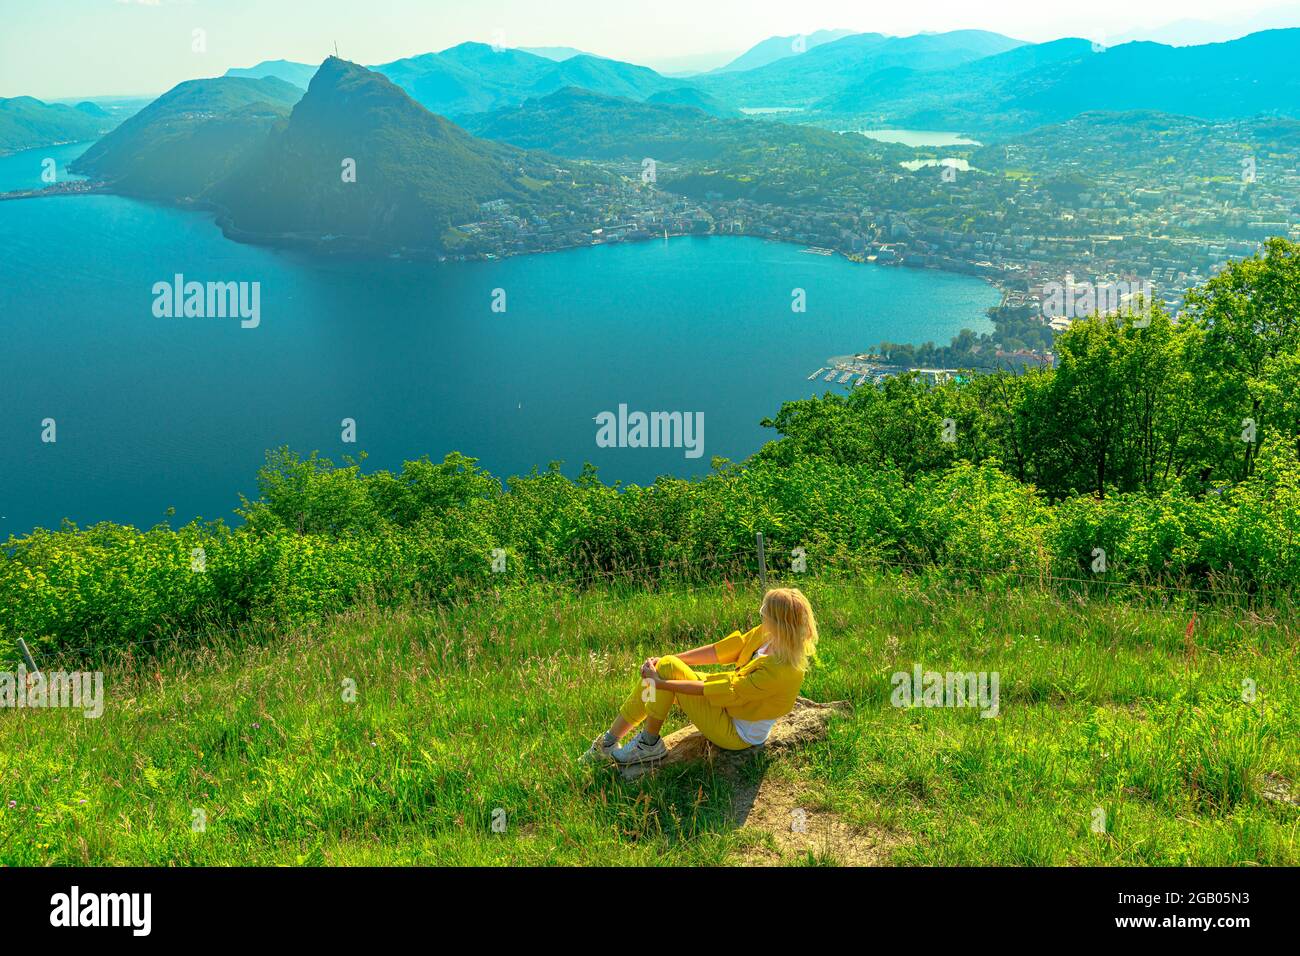 Girl by lakefront of Lugano Lake in Switzerland. Aerial lookout from Monte Bre Mount. Lugano cityscape with San Salvatore mount in Ticino canton. Stock Photo